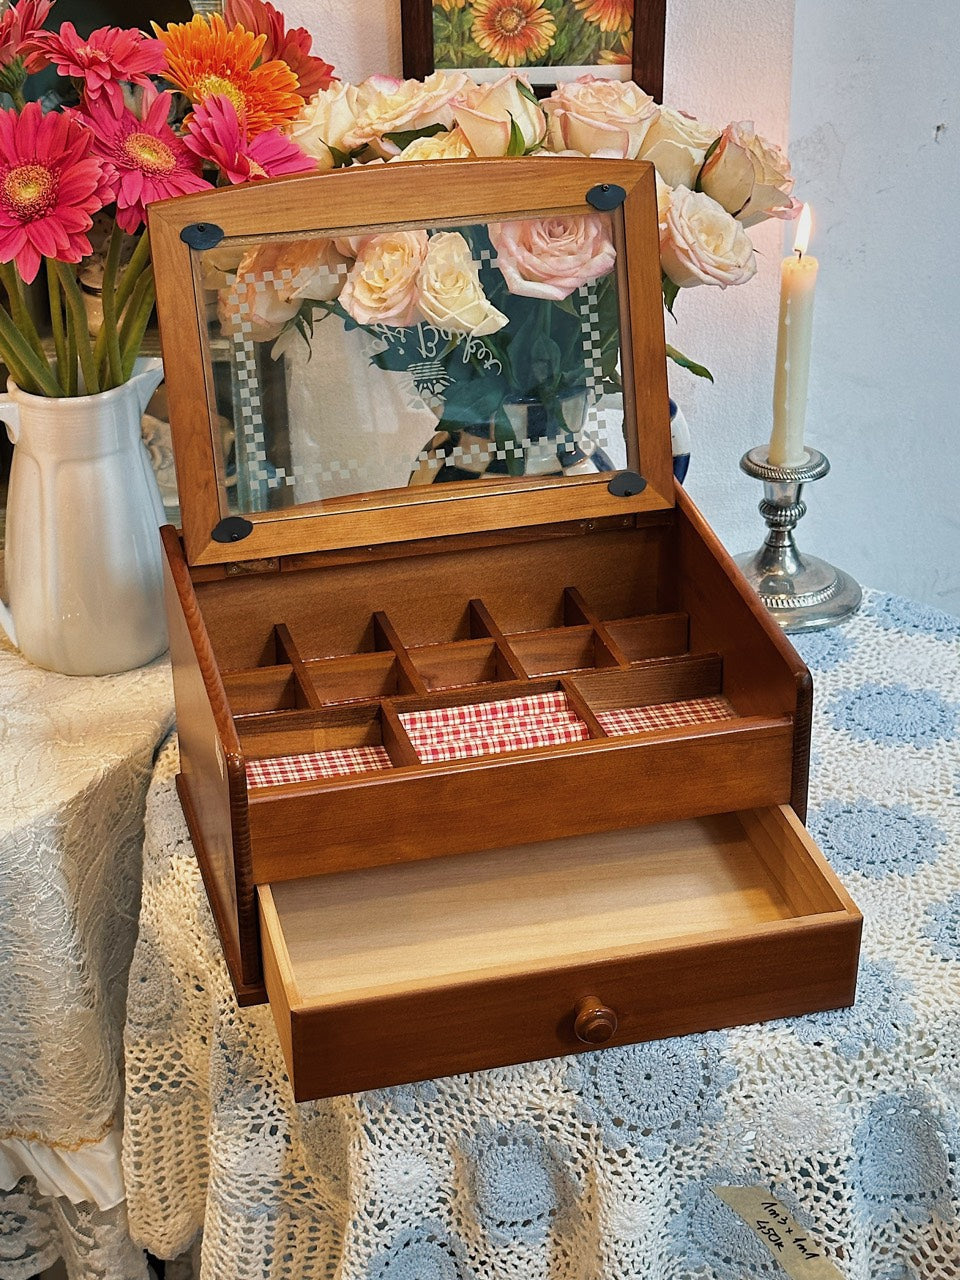 Lucy's Basket Wooden Box